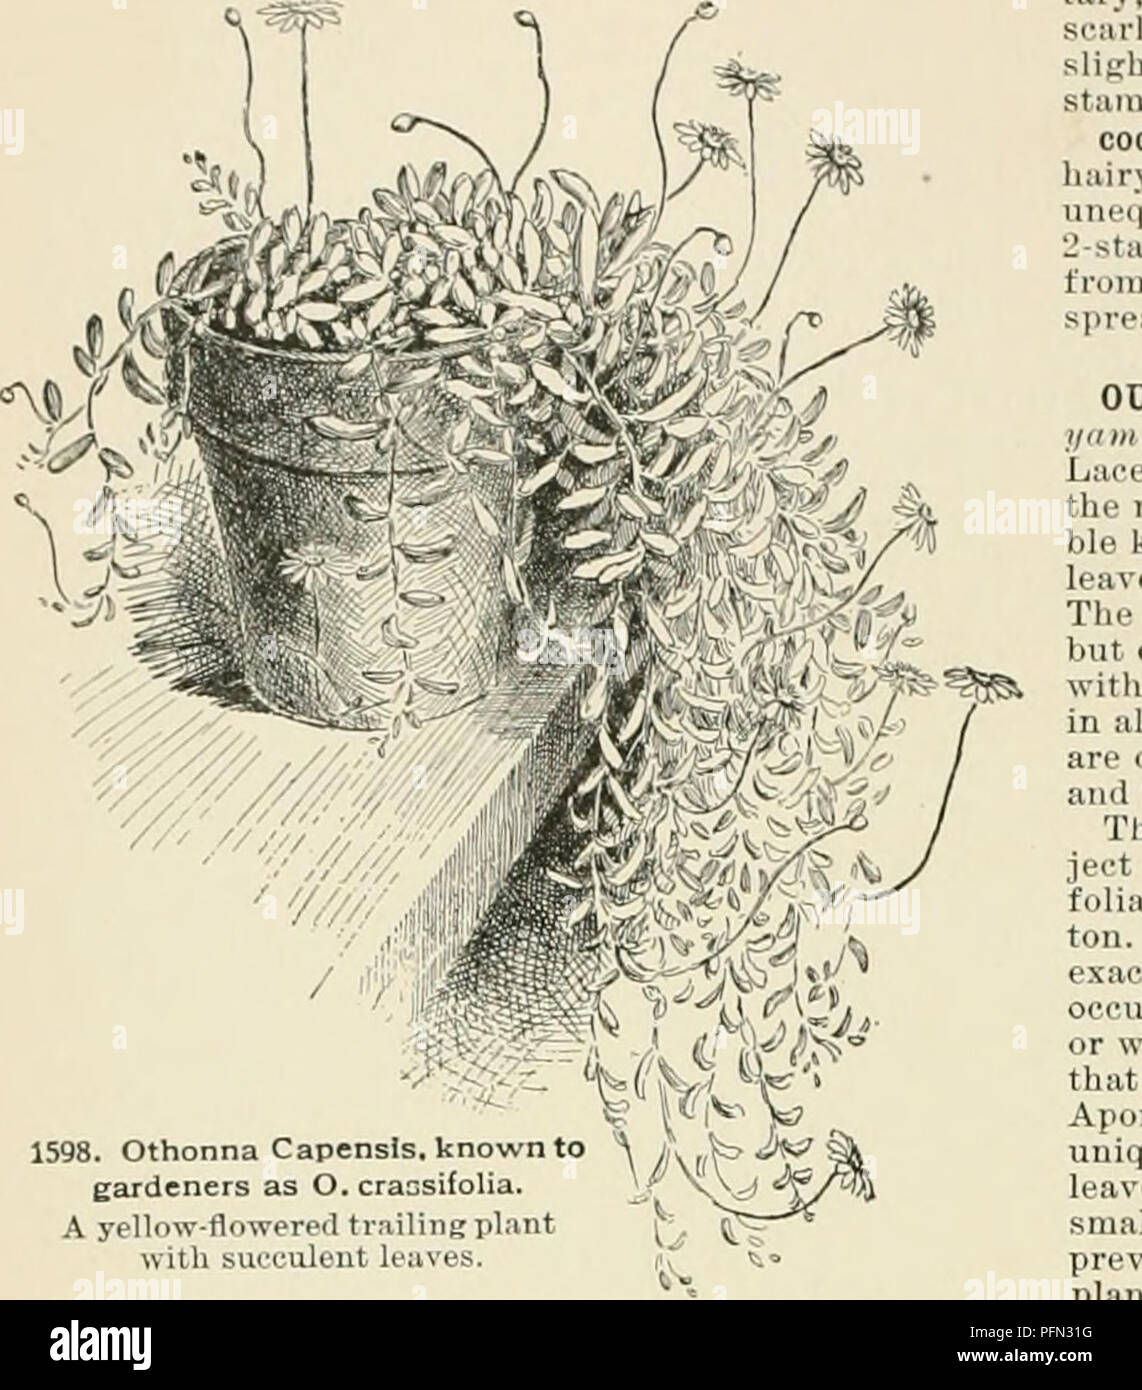 . Cyclopedia of American horticulture, comprising suggestions for cultivation of horticultural plants, descriptions of the species of fruits, vegetables, flowers, and ornamental plants sold in the United States and Canada, together with geographical and biographical sketches. Gardening. crassifolia of Harvey was once ileaui-ibed as O. filieait- lis, but this name also has been previously used in the genus. It seems, therefore, as if a new name must be. 1598 Othonna Capensls. kl lers as O crassifoha â flowered tl illing plint h sucyuleut leaves. Atrir;,,  ture of tUf Cap6nsis probably not ) th Stock Photo